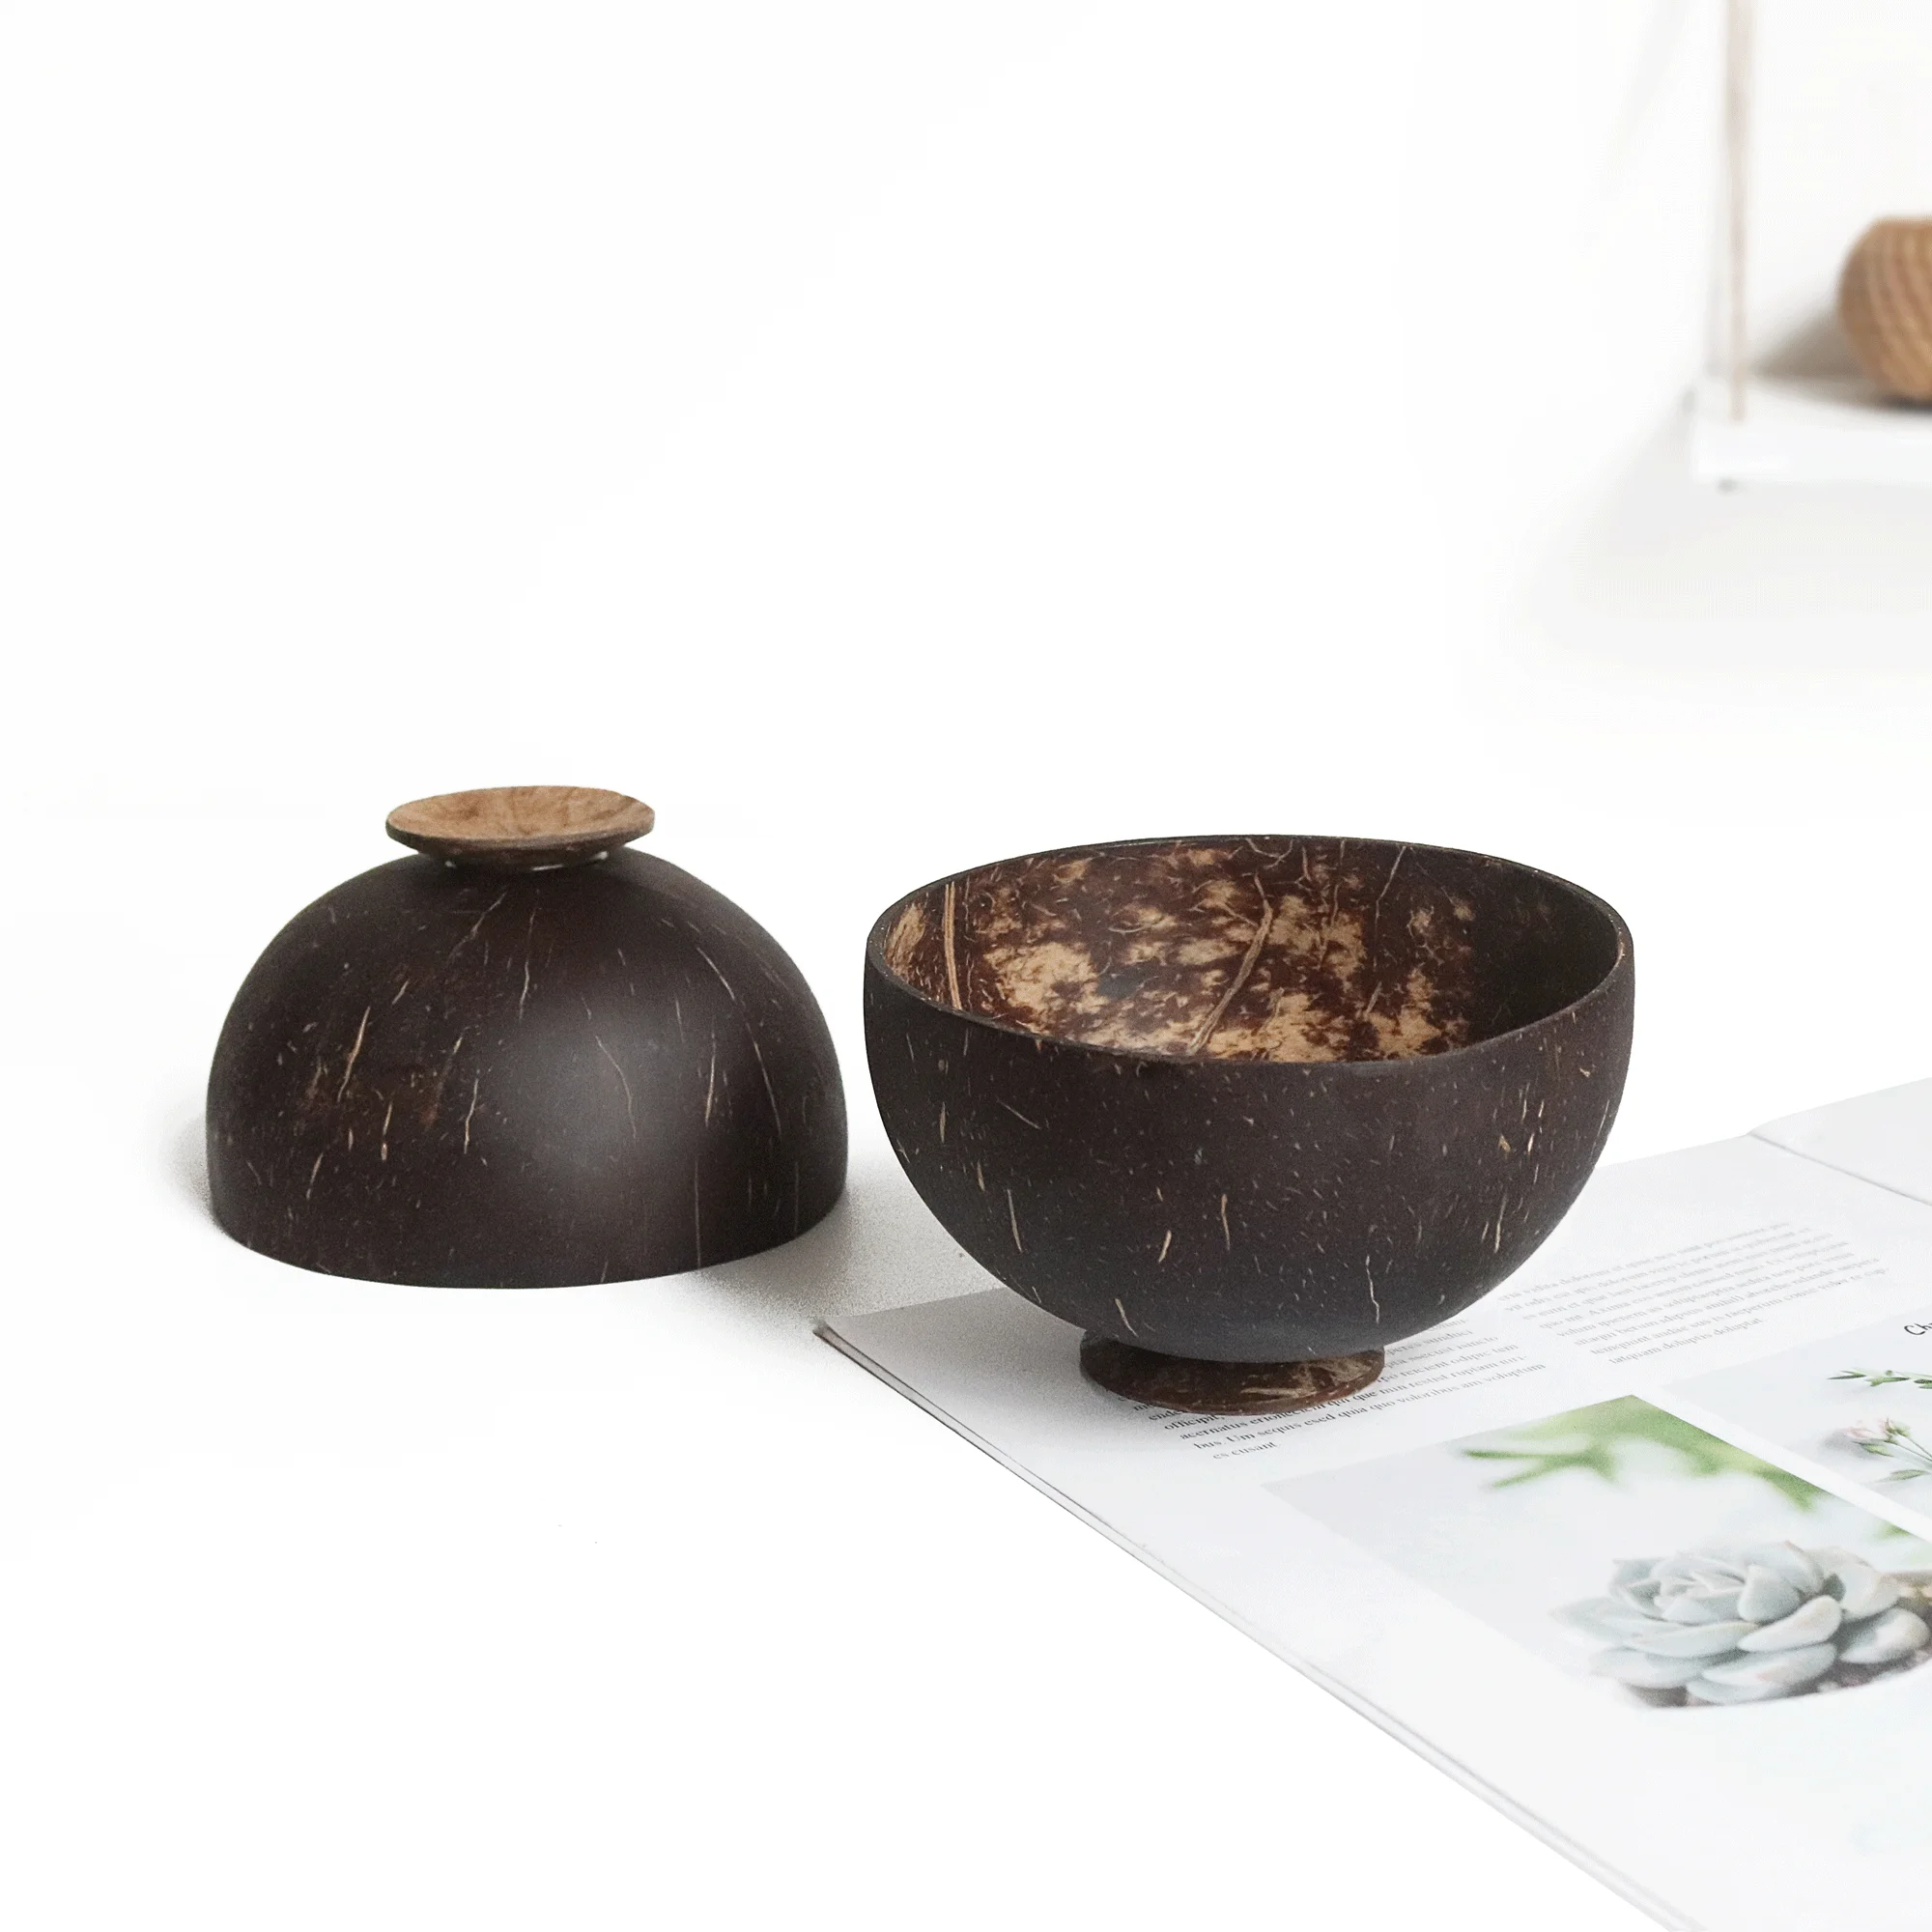 

100% Natural Low MOQ Polished Coconut Shell Bowl from Vietnam Coconut Shell Bowl